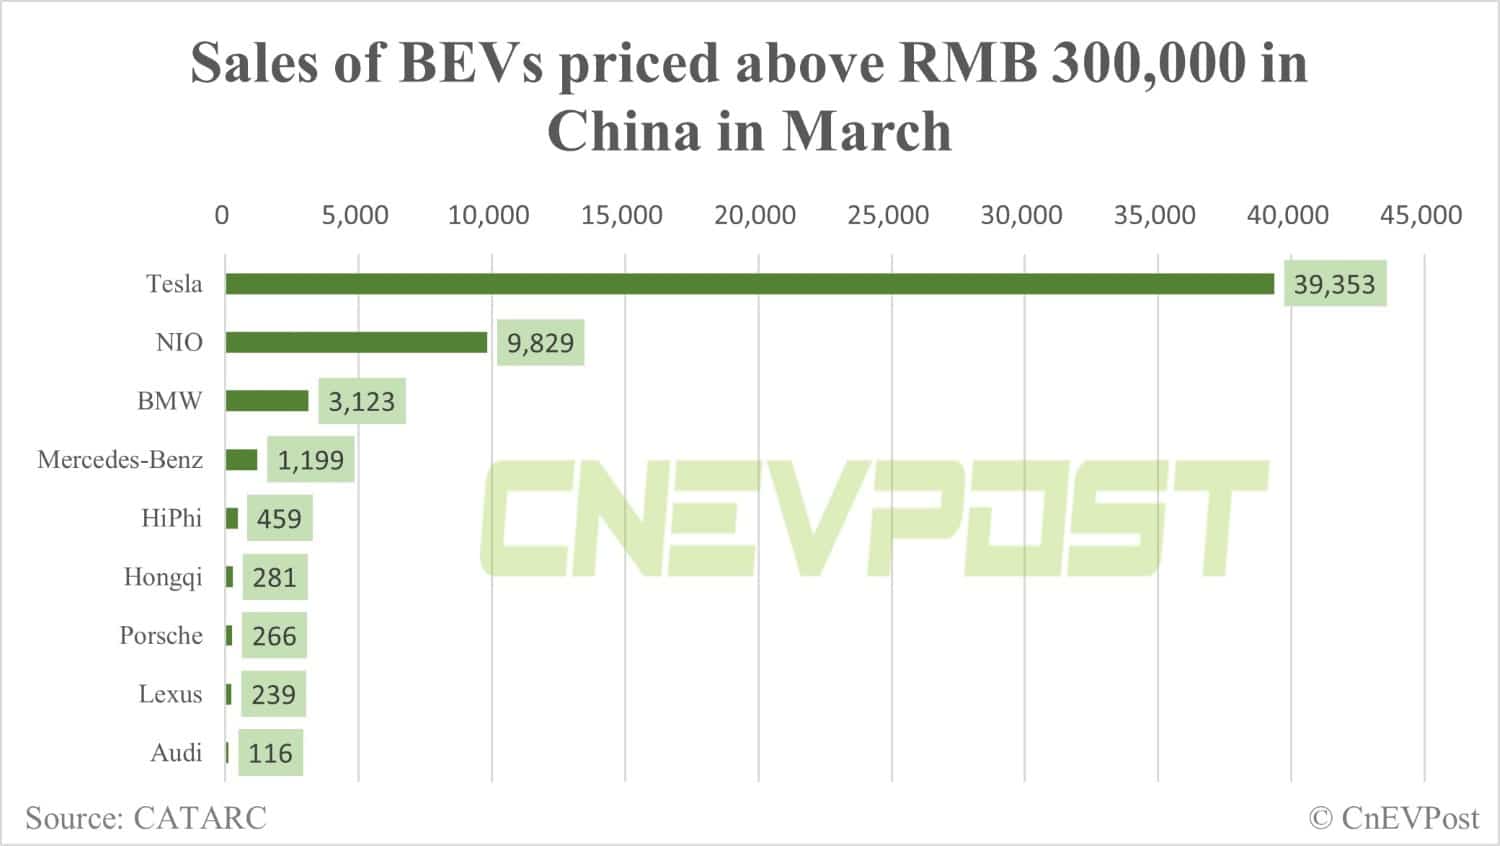 NIO's sales beat BMW, Mercedes-Benz and Audi's BEVs combined in China in March-CnEVPost